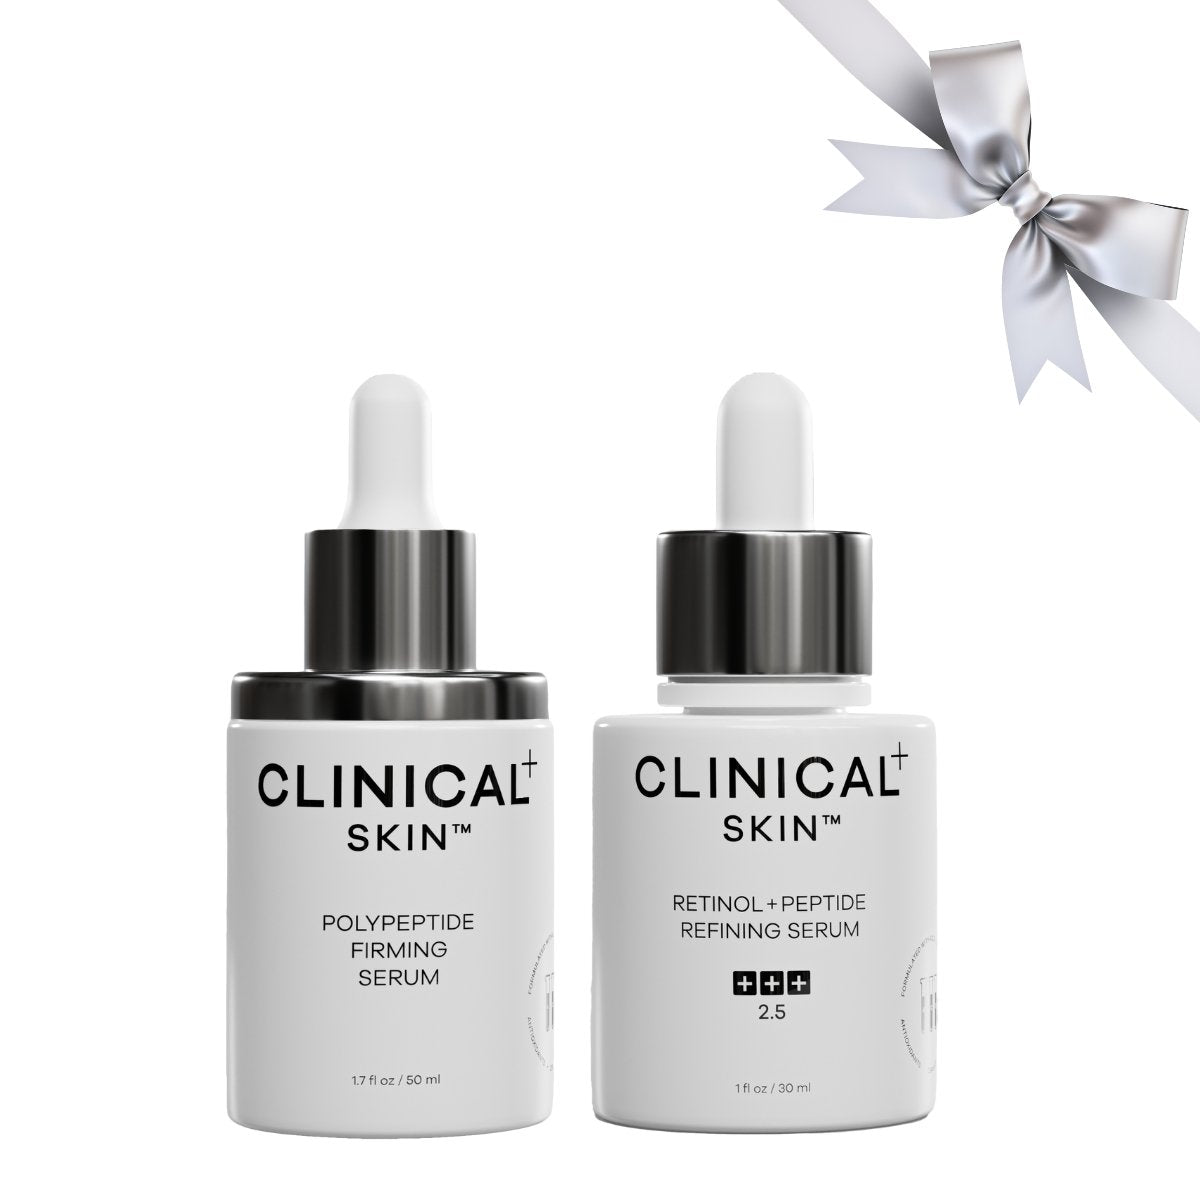 Clinical Skin Advanced Skin Firming and Refining Duo